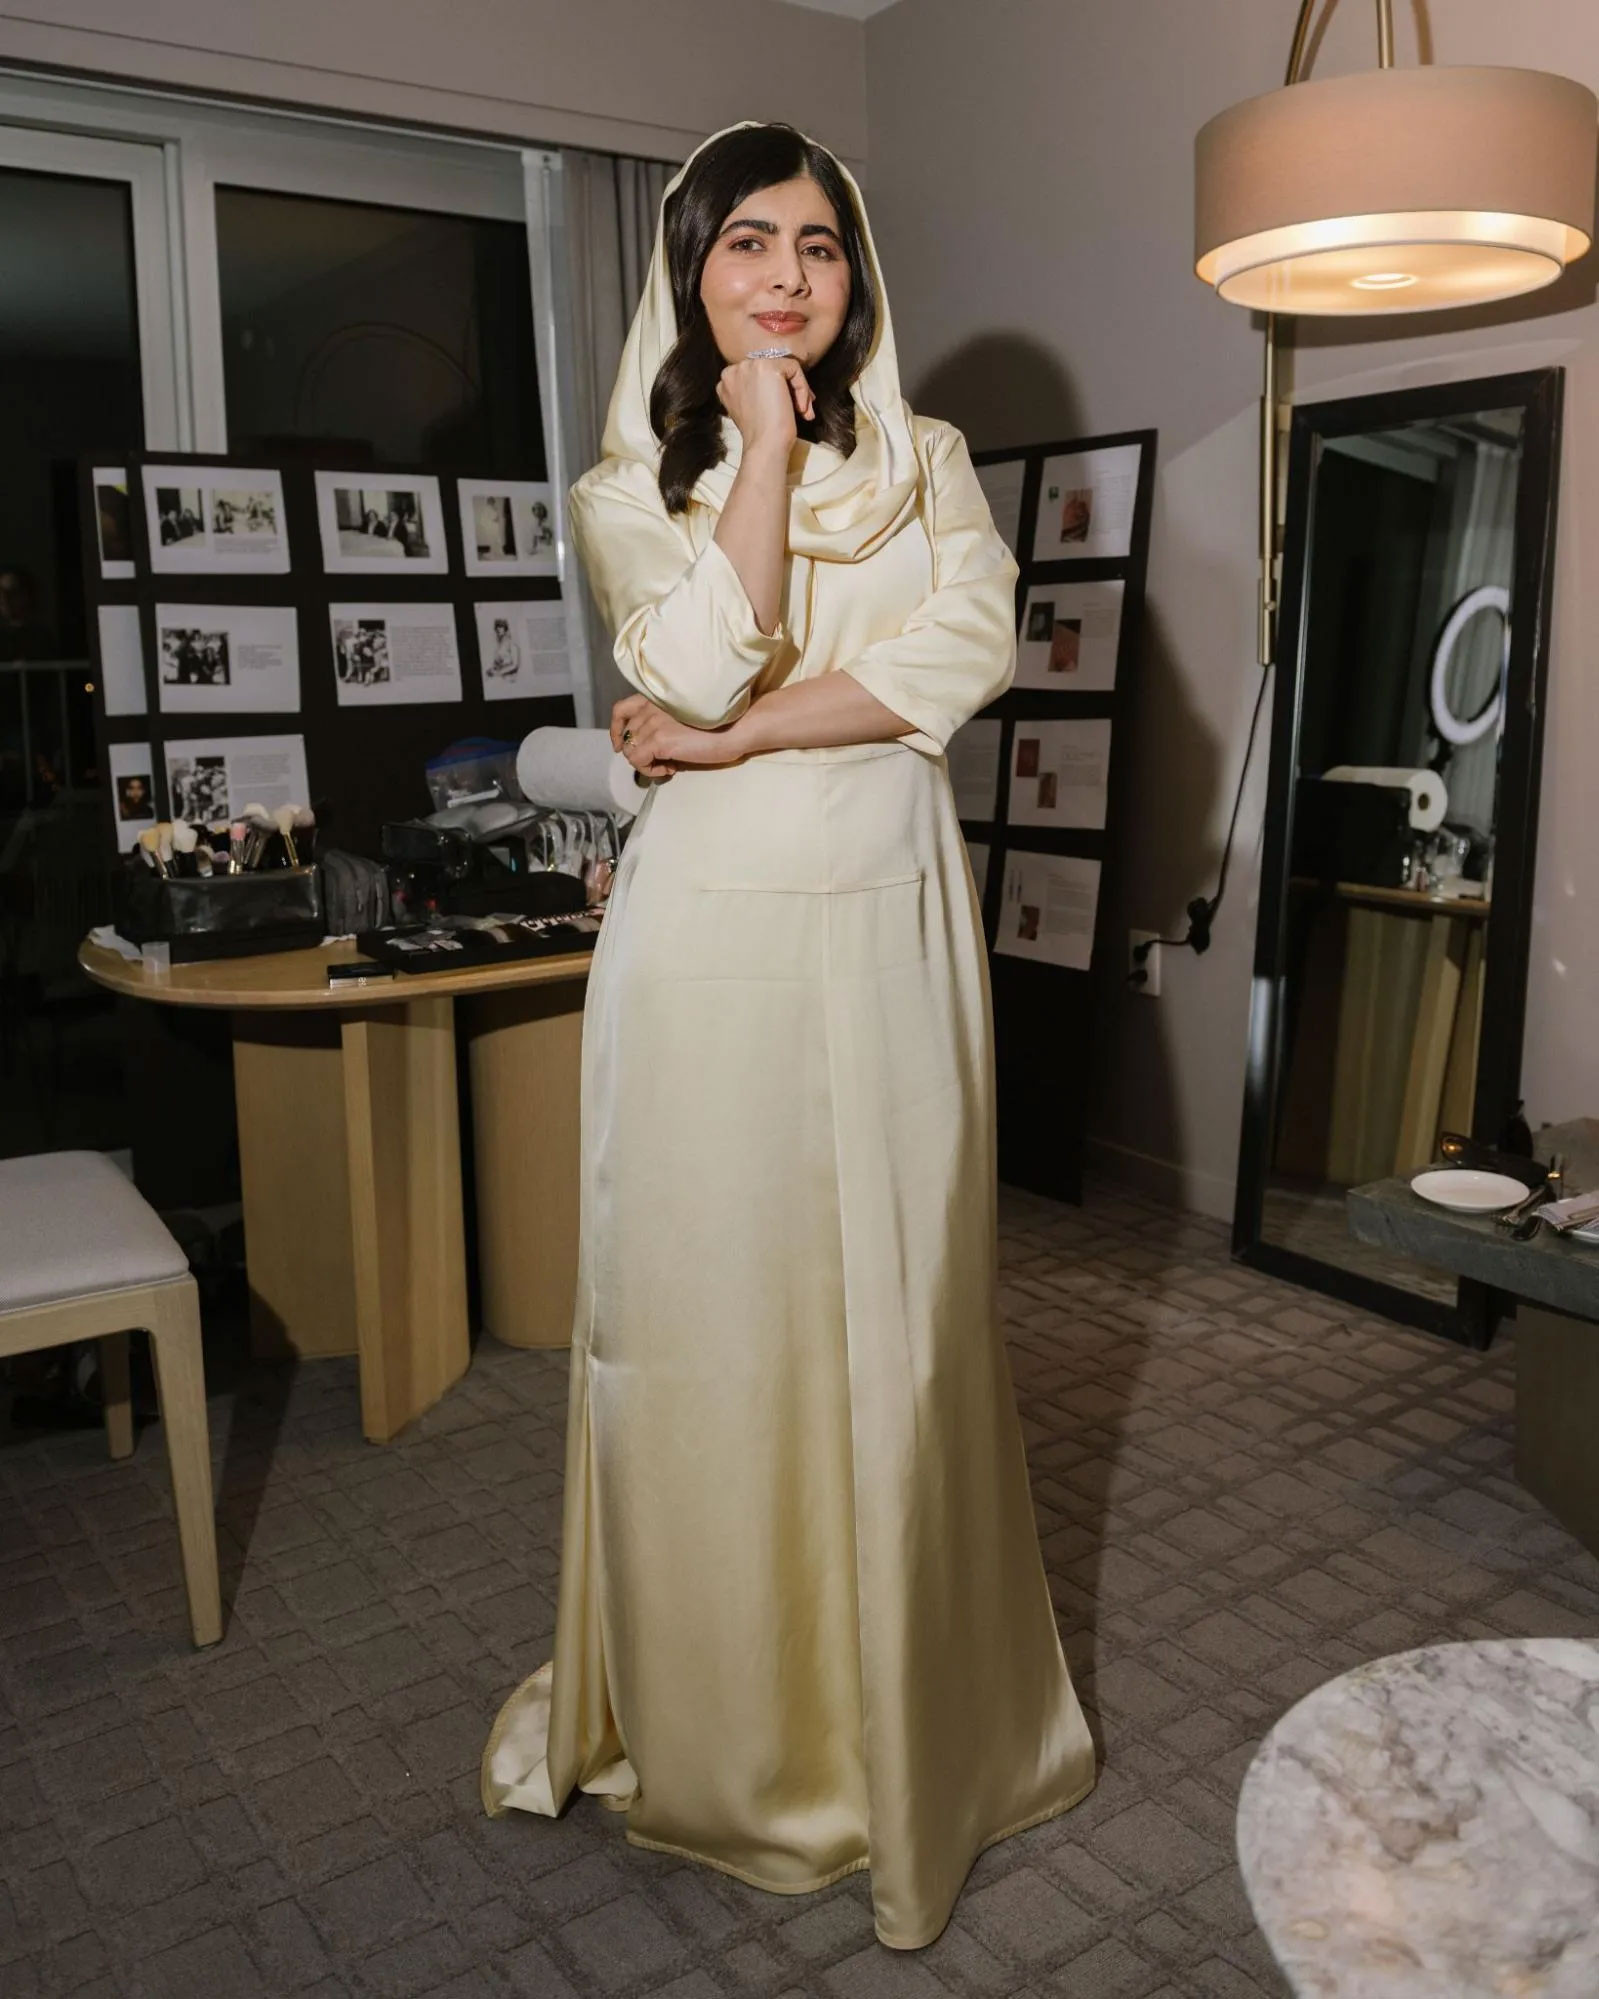 How Malala spent her first Oscars